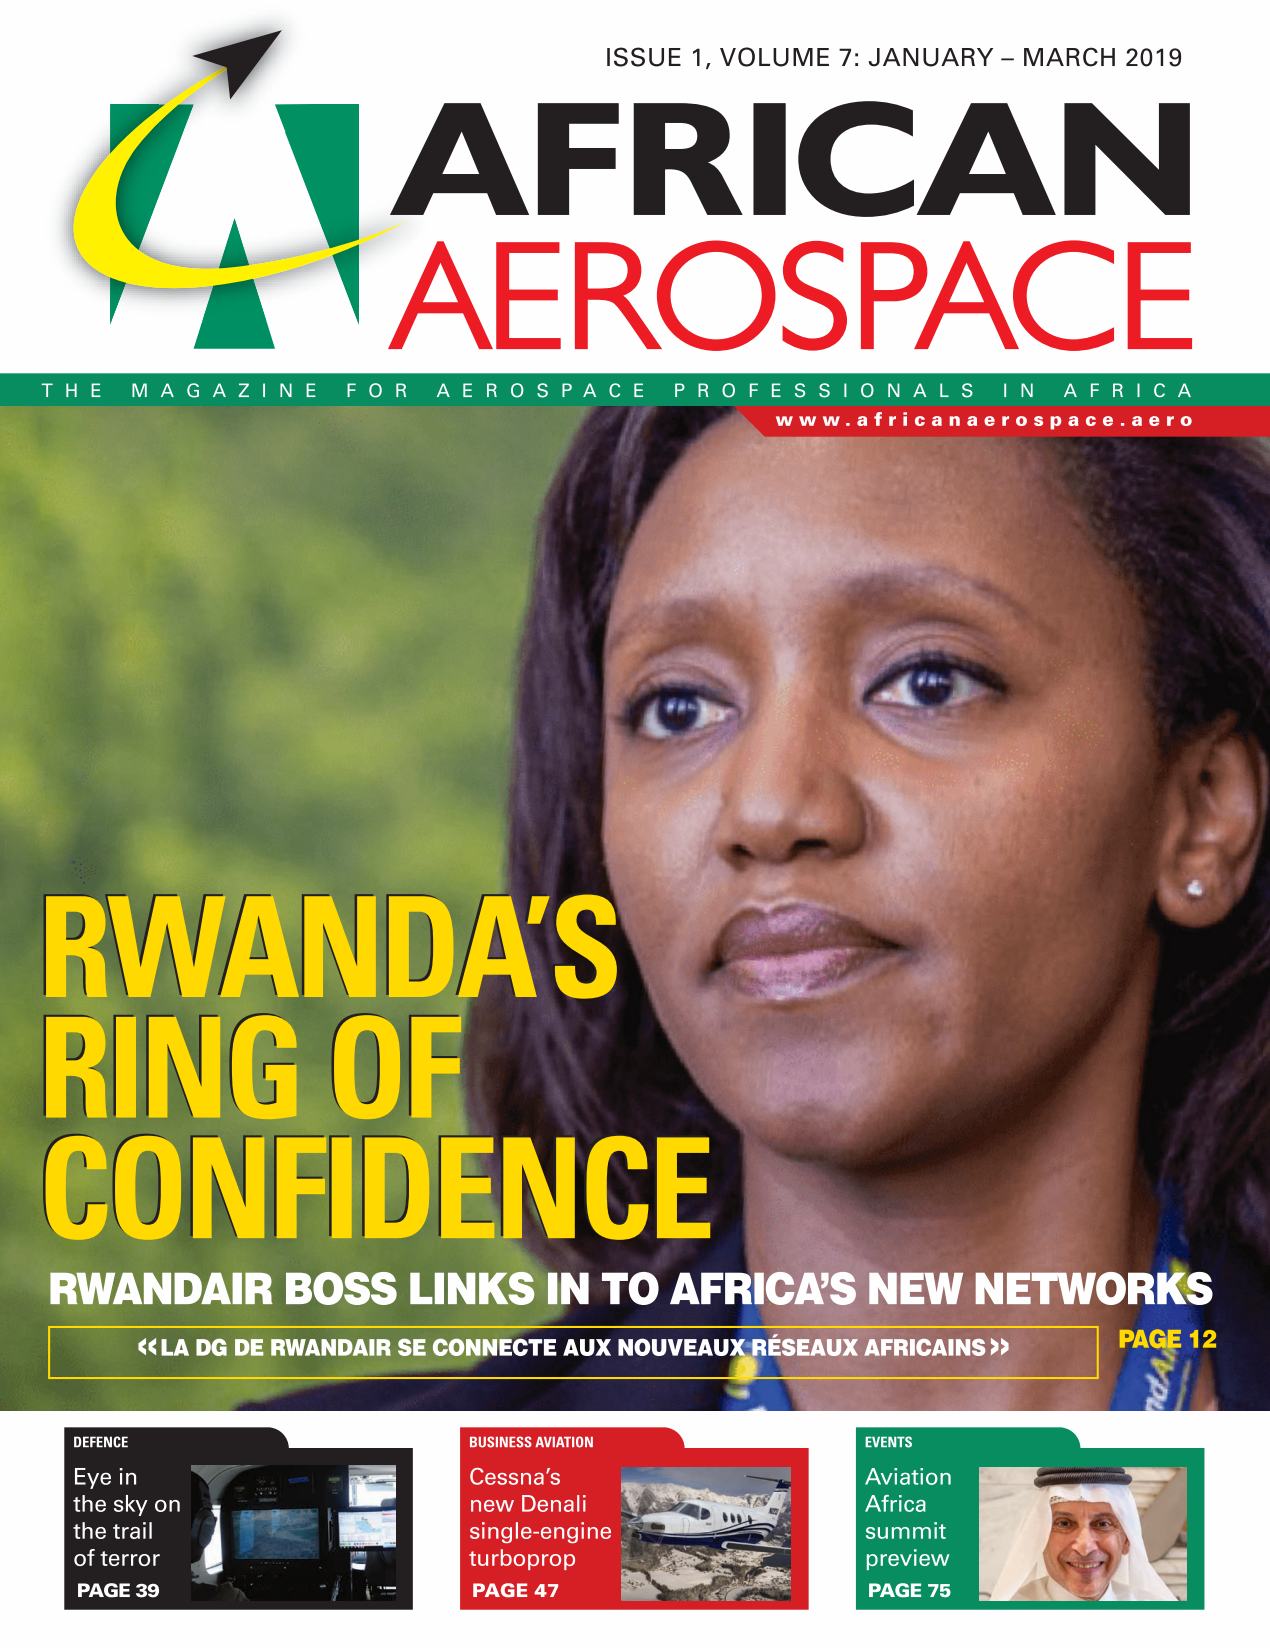 African Aerospace: January-March 2019